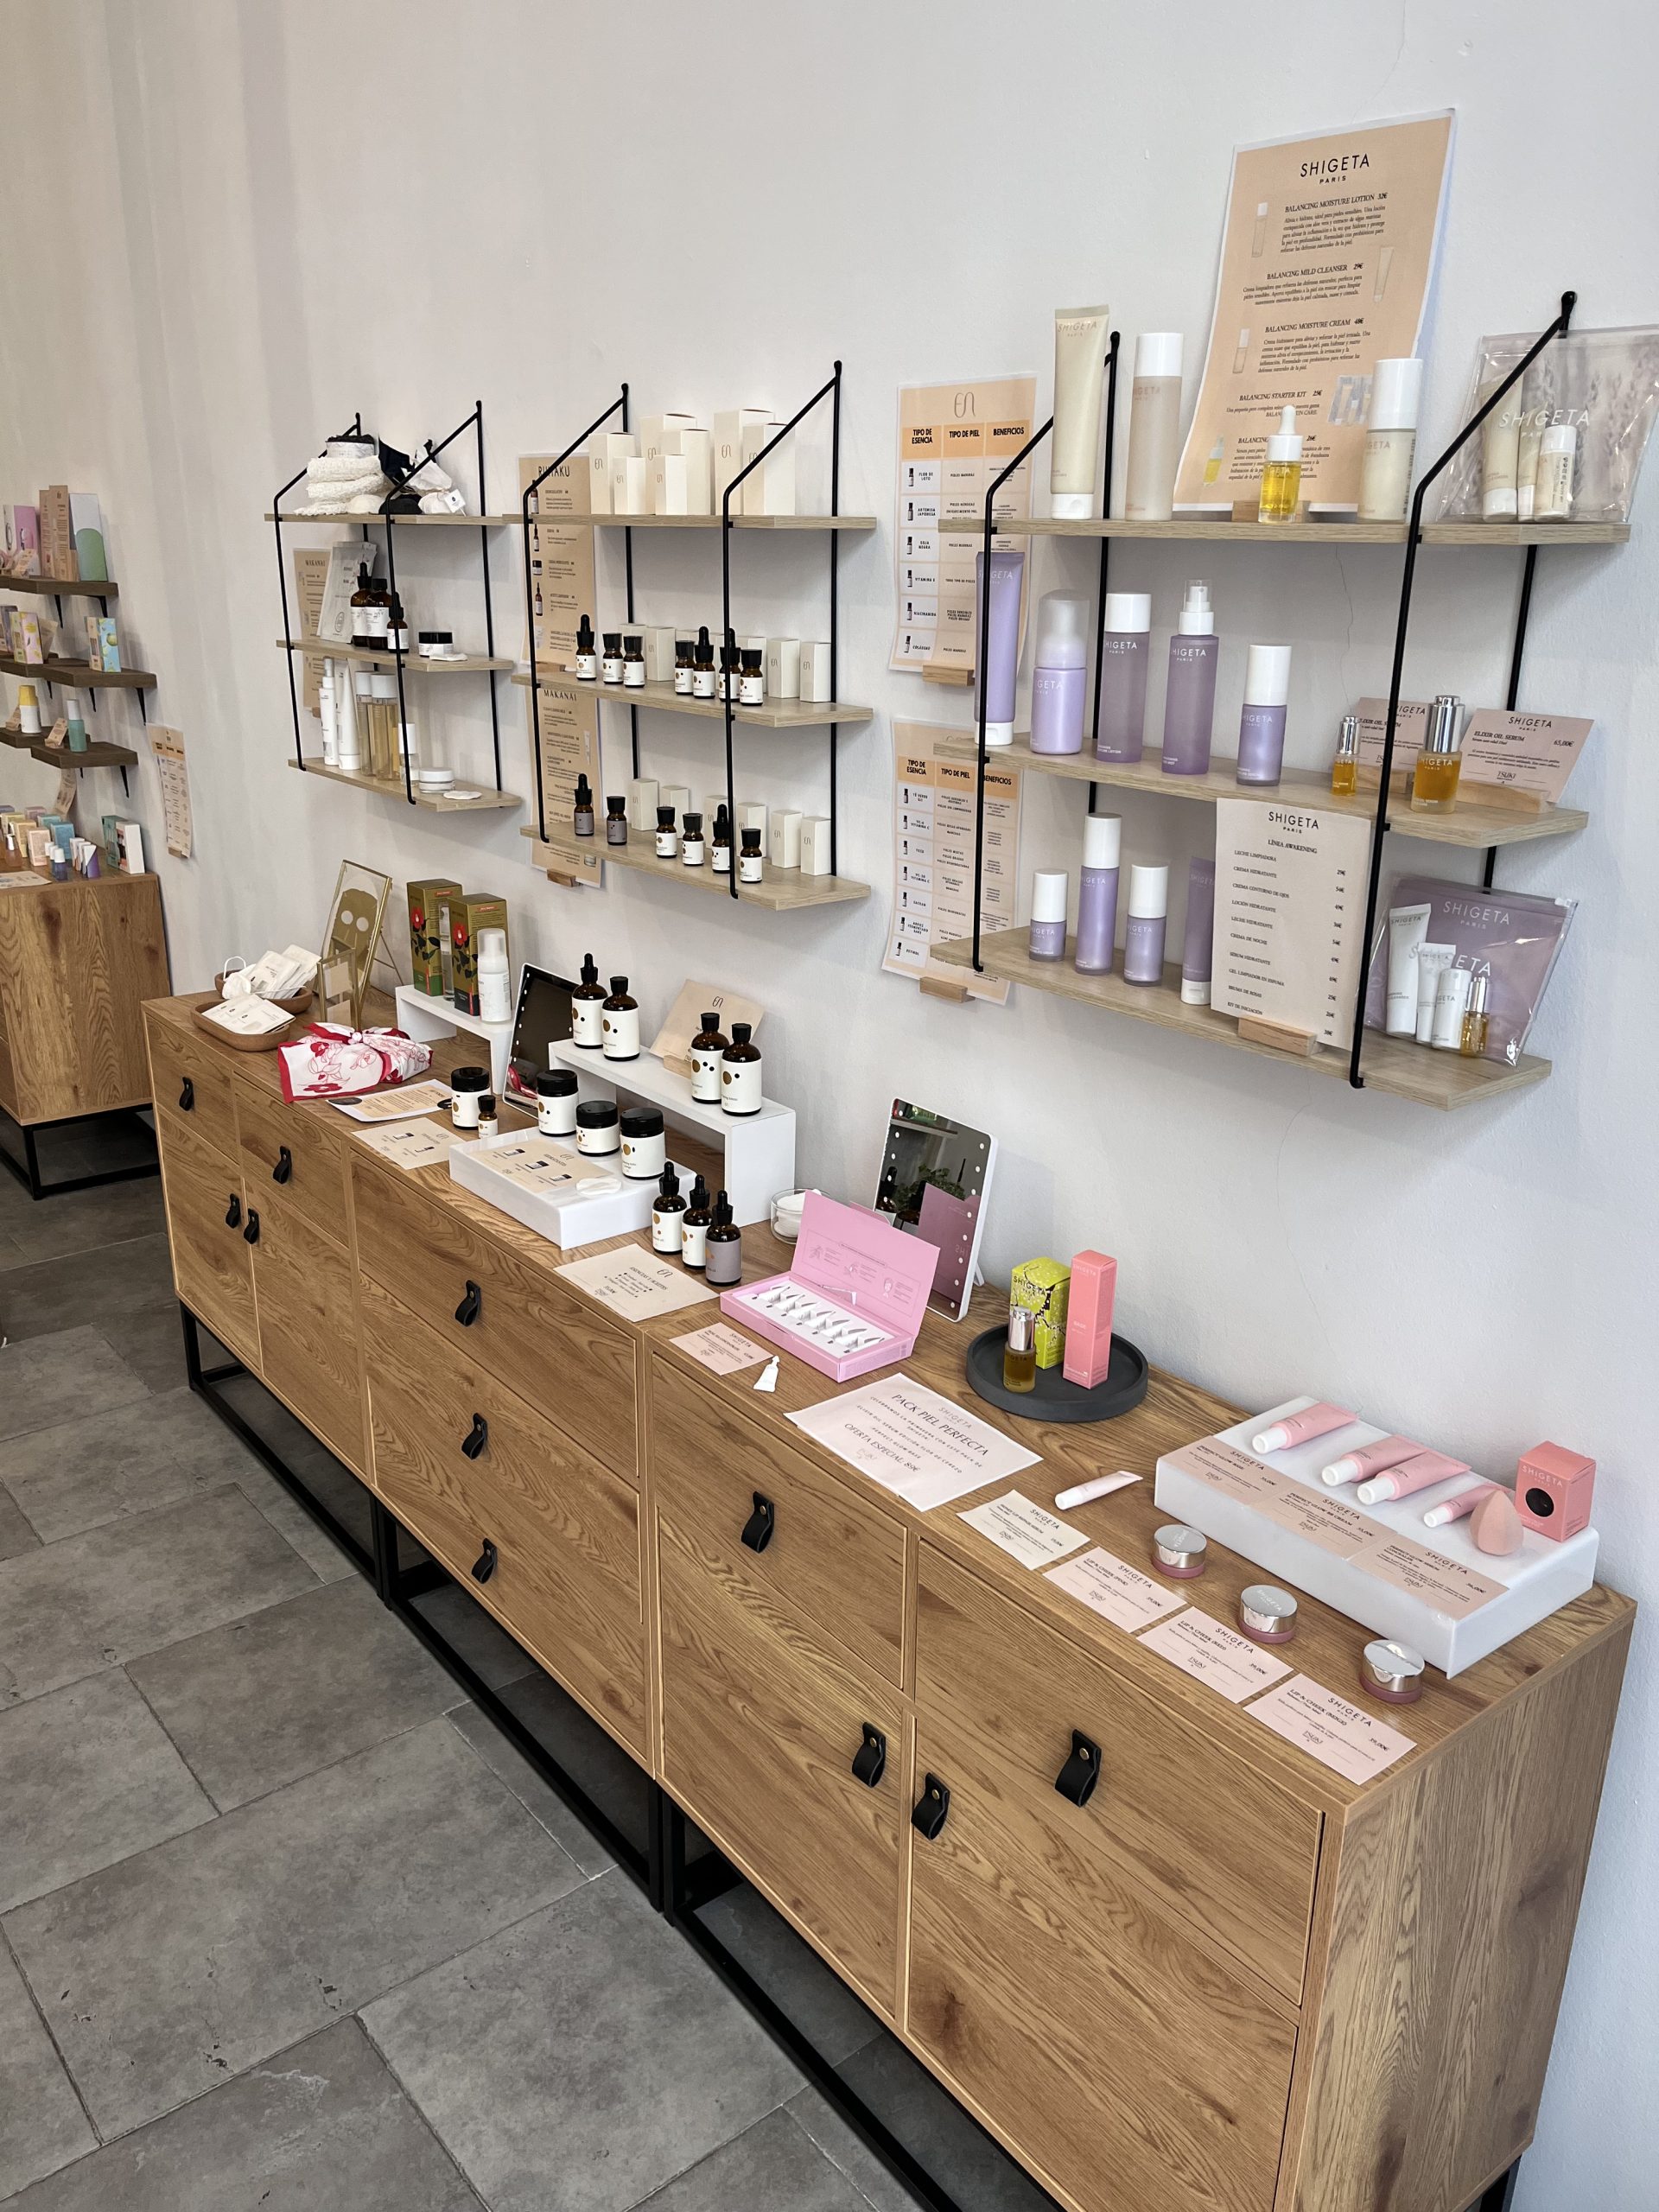 J-Beauty report from Europe Vol. 8: TSUKI Cosmetics reveals and develops the underlying strength of J-Beauty in Spain